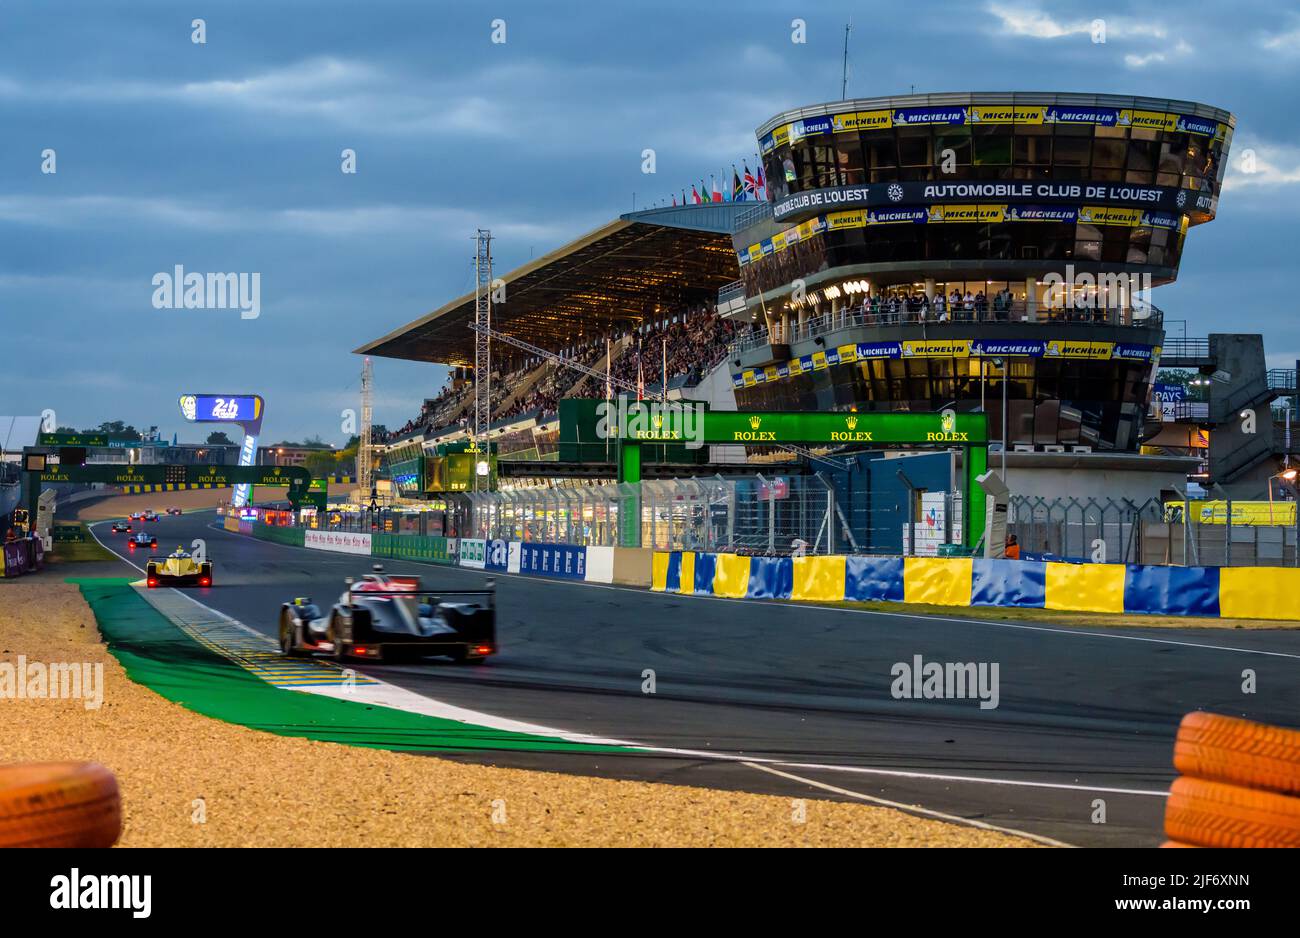 Prototype and GT race cars drive in the pit straight at nightfall on the Circuit de la Sarthe racetrack during the 24 hours of Le Mans. Stock Photo